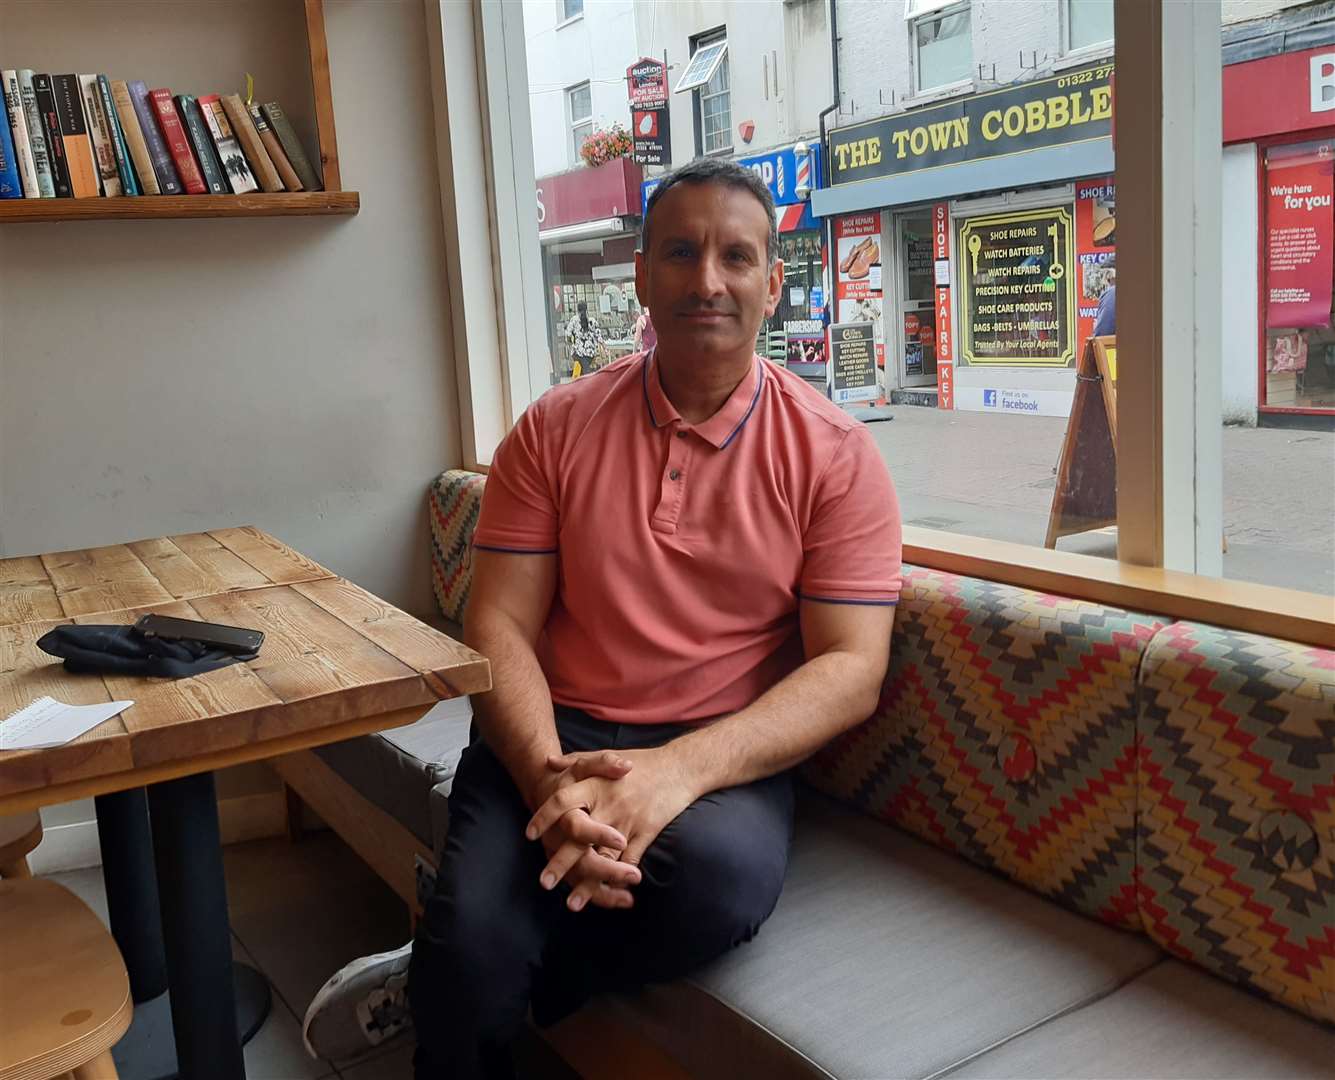 Owner of Esquires Coffee Gurjit Rhandhawa said a bounce back in trade during August filled him with enough confidence to proceed with a second store